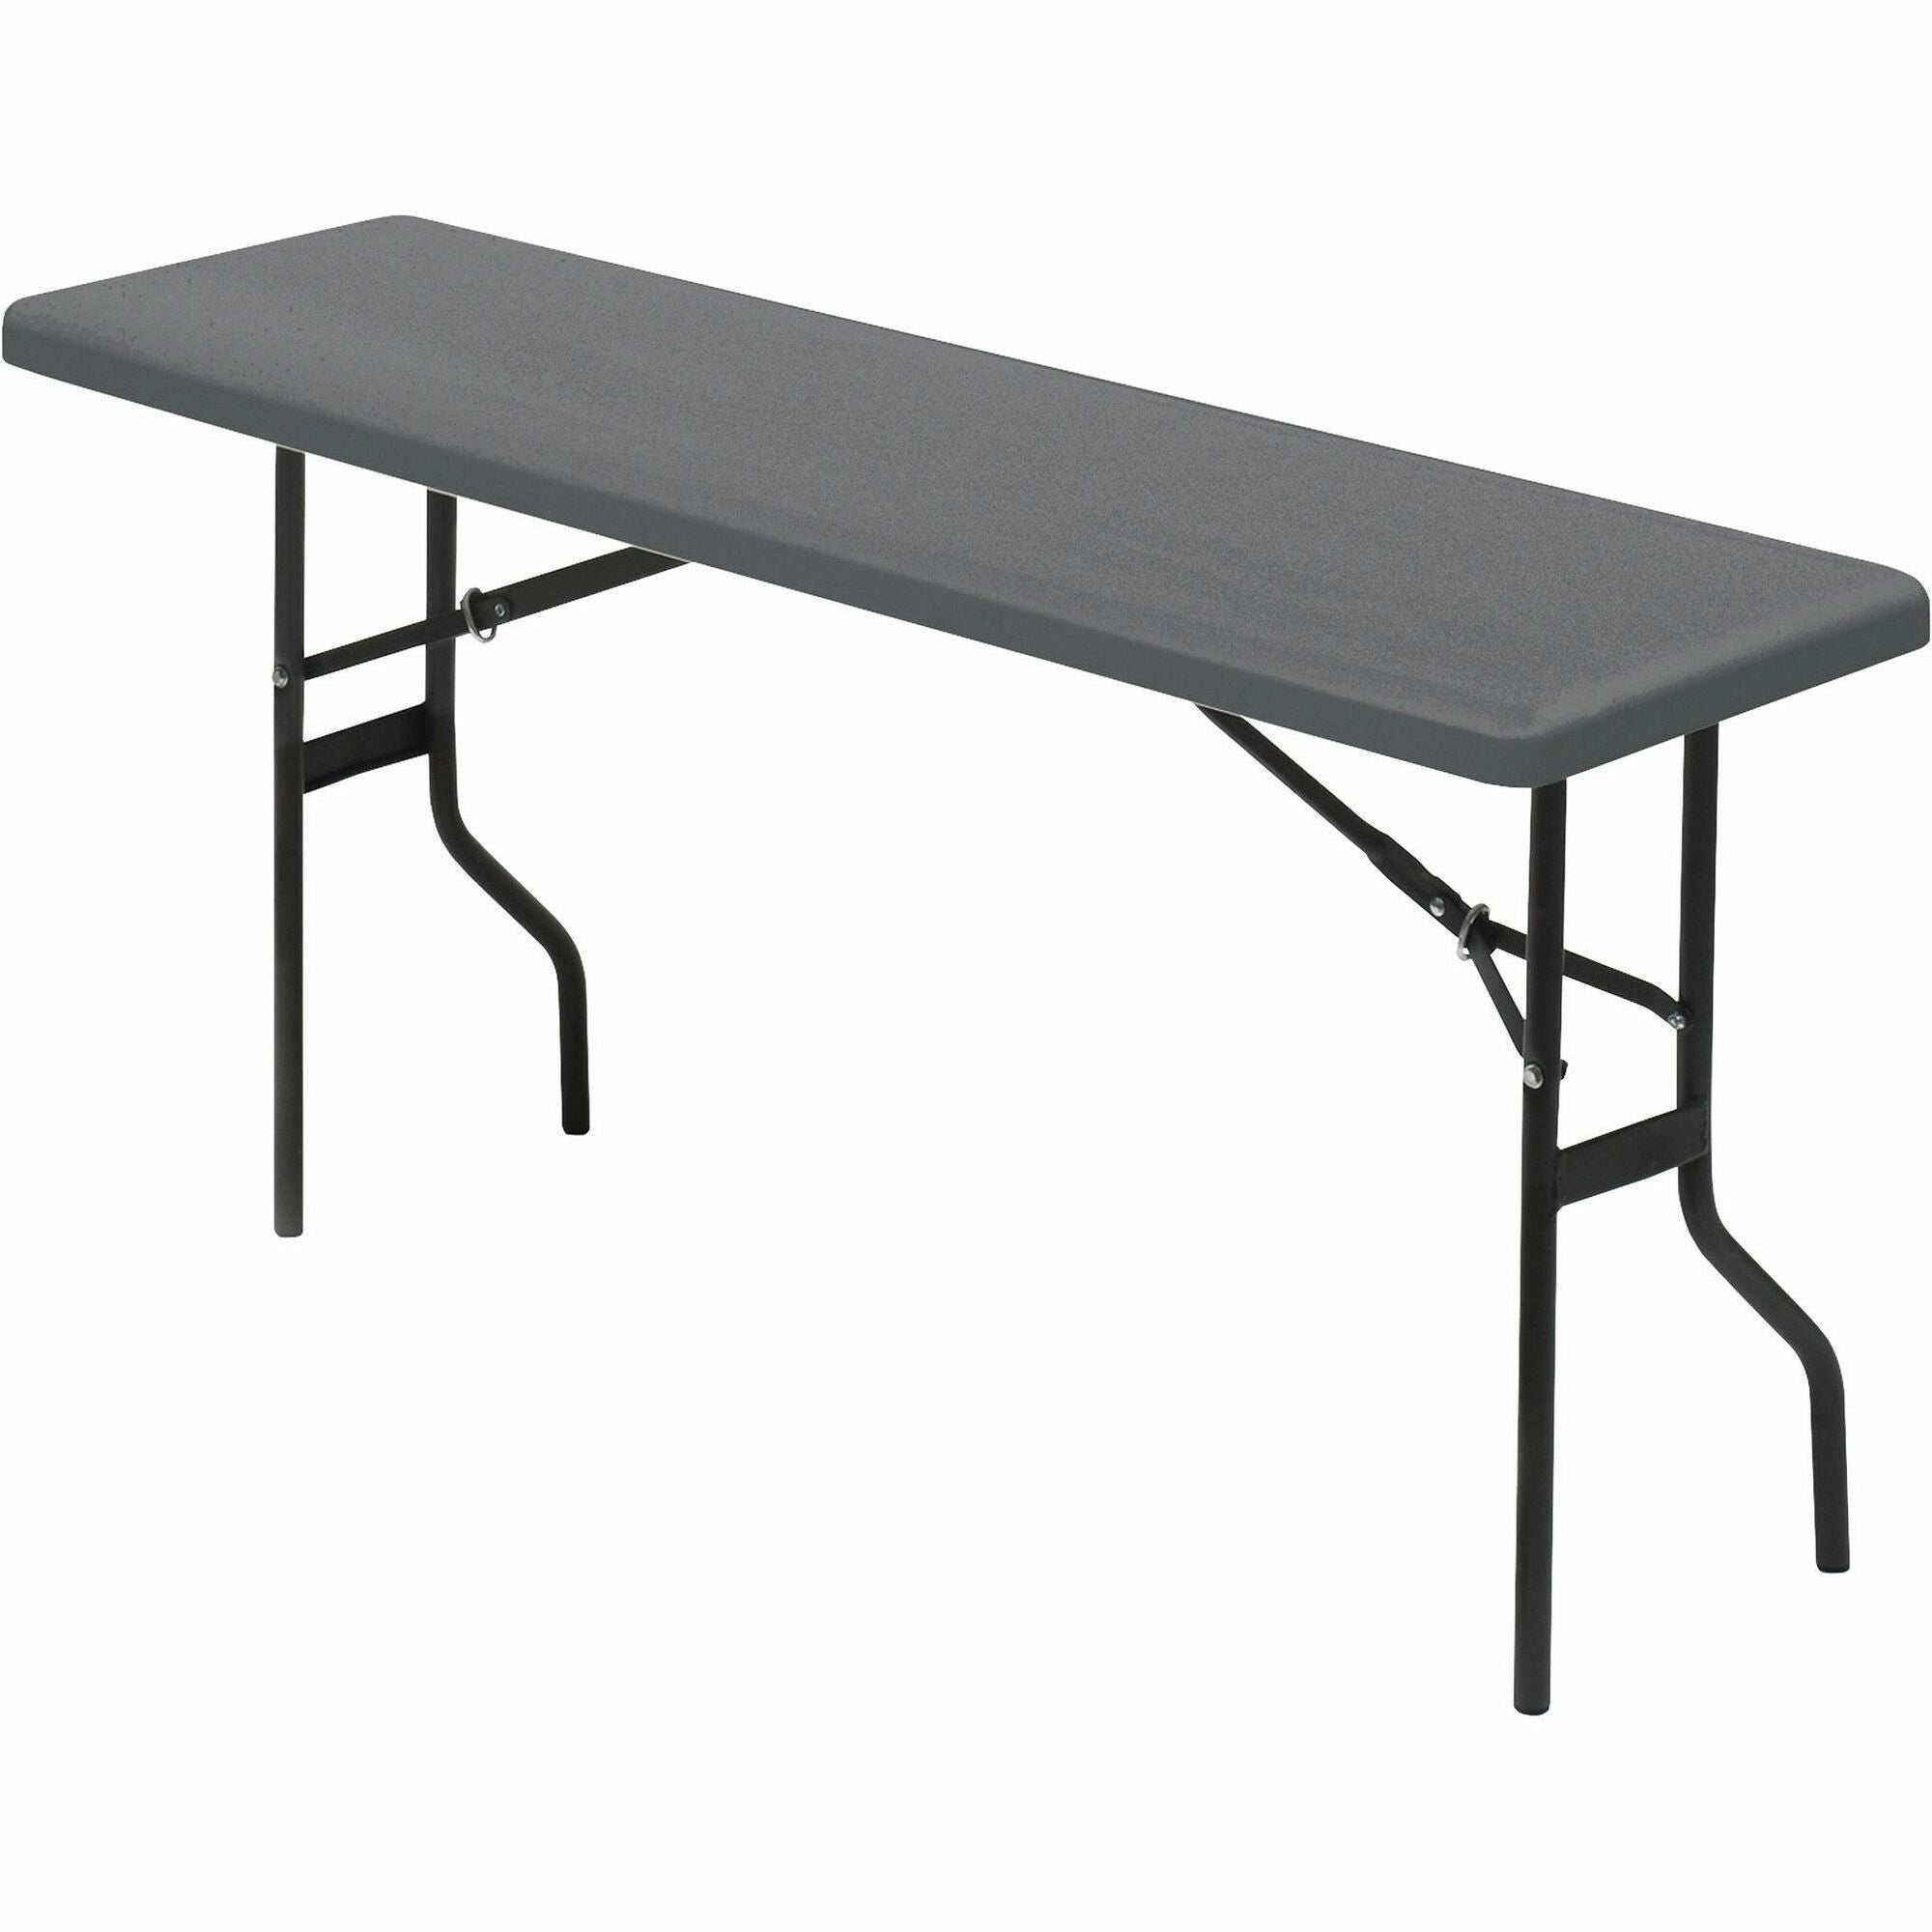 Iceberg IndestrucTable TOO 1200 Series Foldlng Table - For - Table TopRectangle Top - Contemporary Style - 250 lb Capacity - 60" Table Top Length x 18" Table Top Width - 29" Height - Charcoal, Powder Coated - 1 Each - 